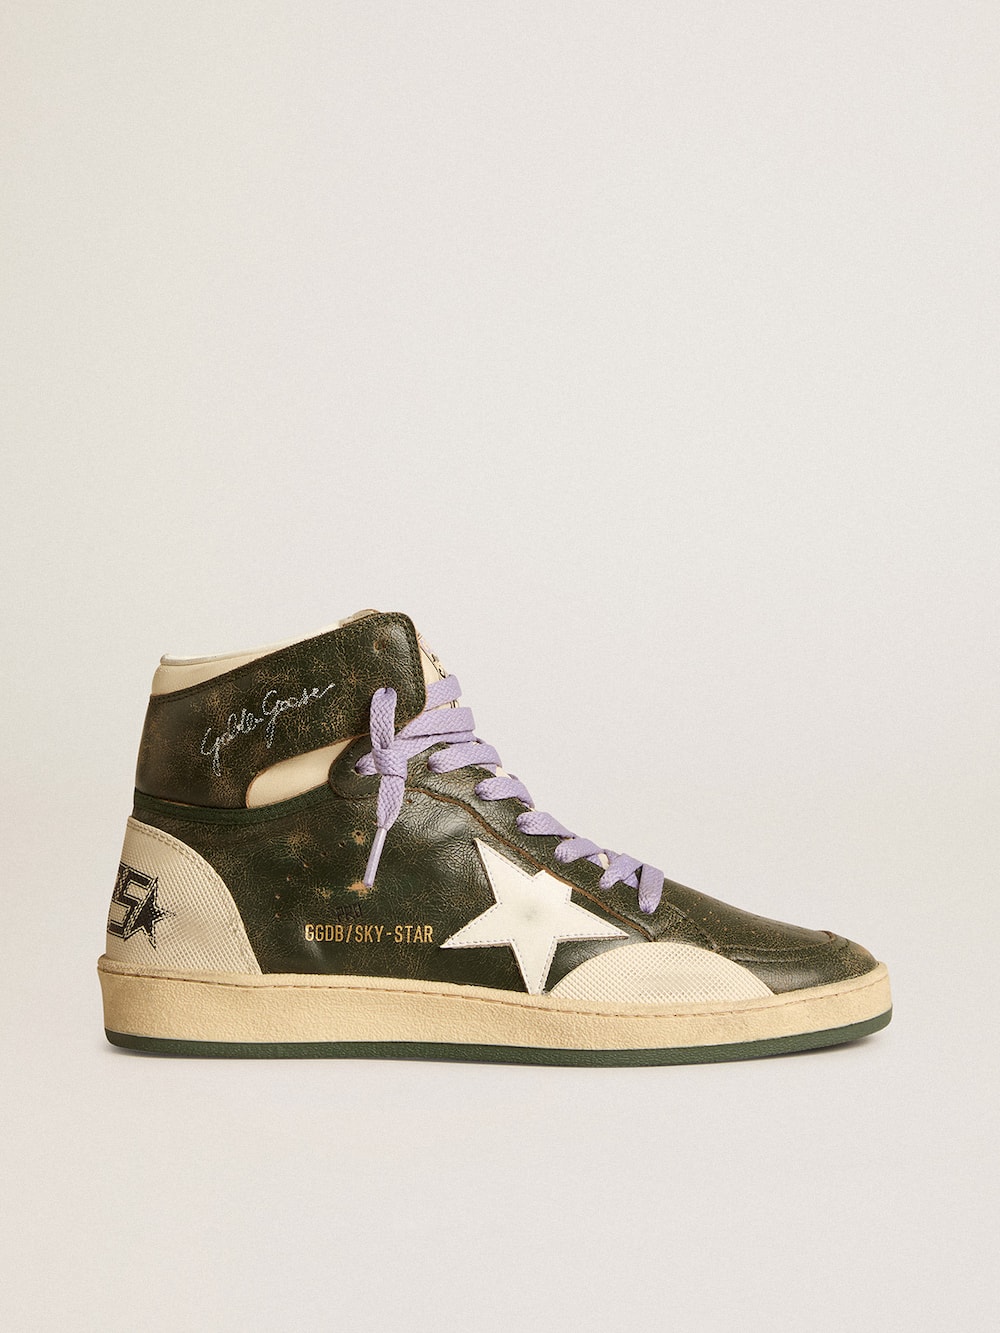 Golden Goose - Men's Sky-Star Pro in green leather with white star in 